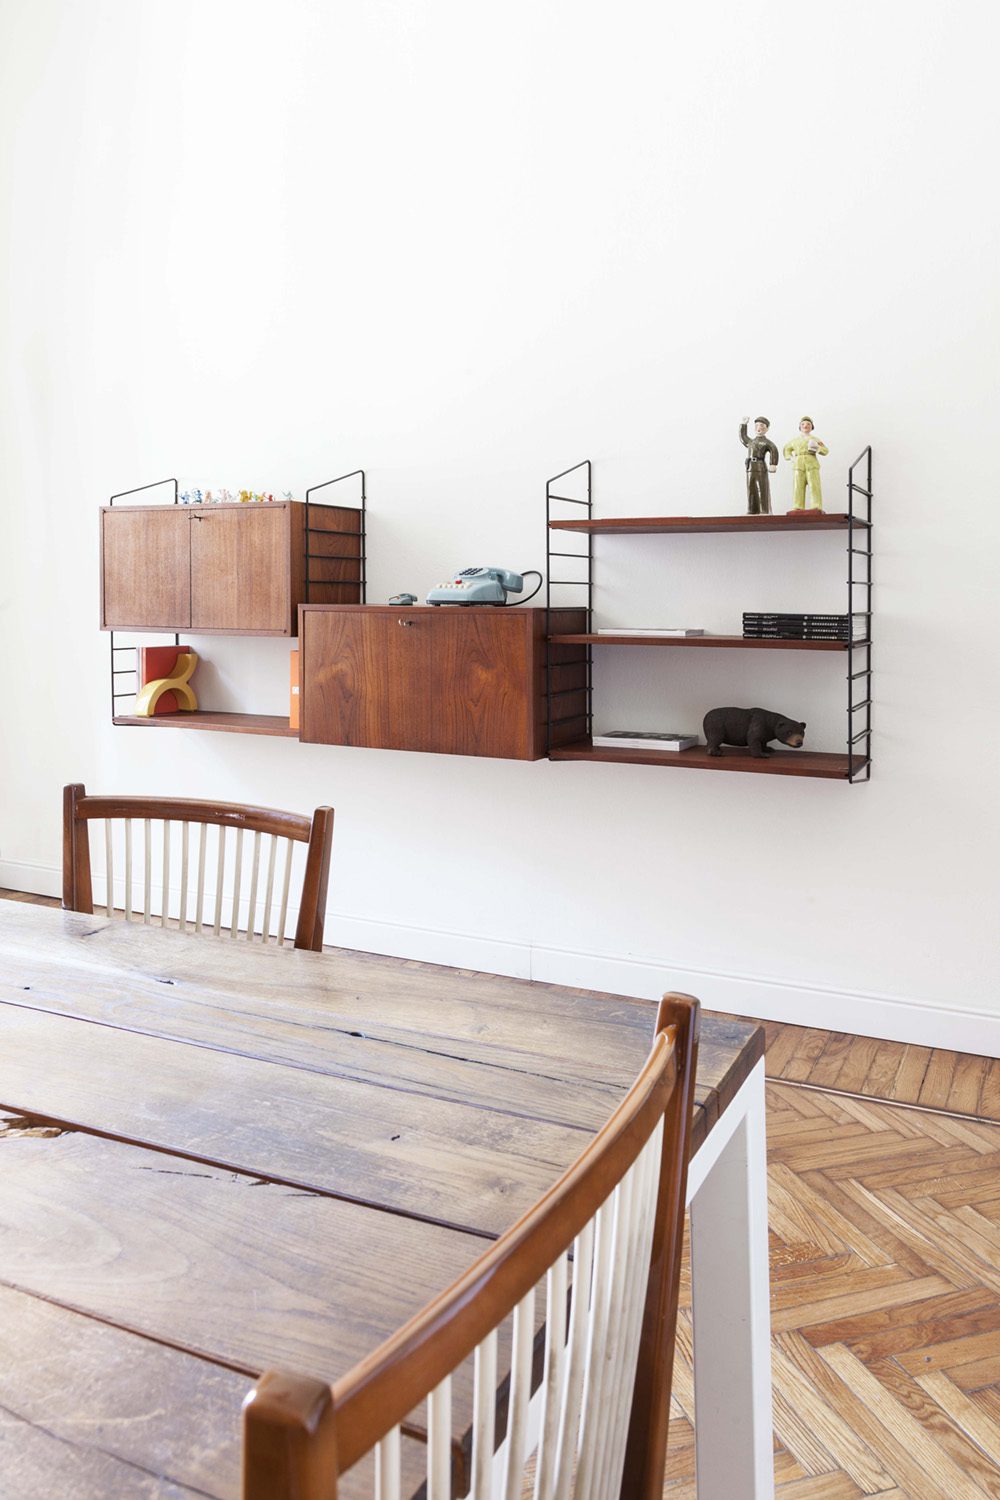 Meeting table with shelving unit